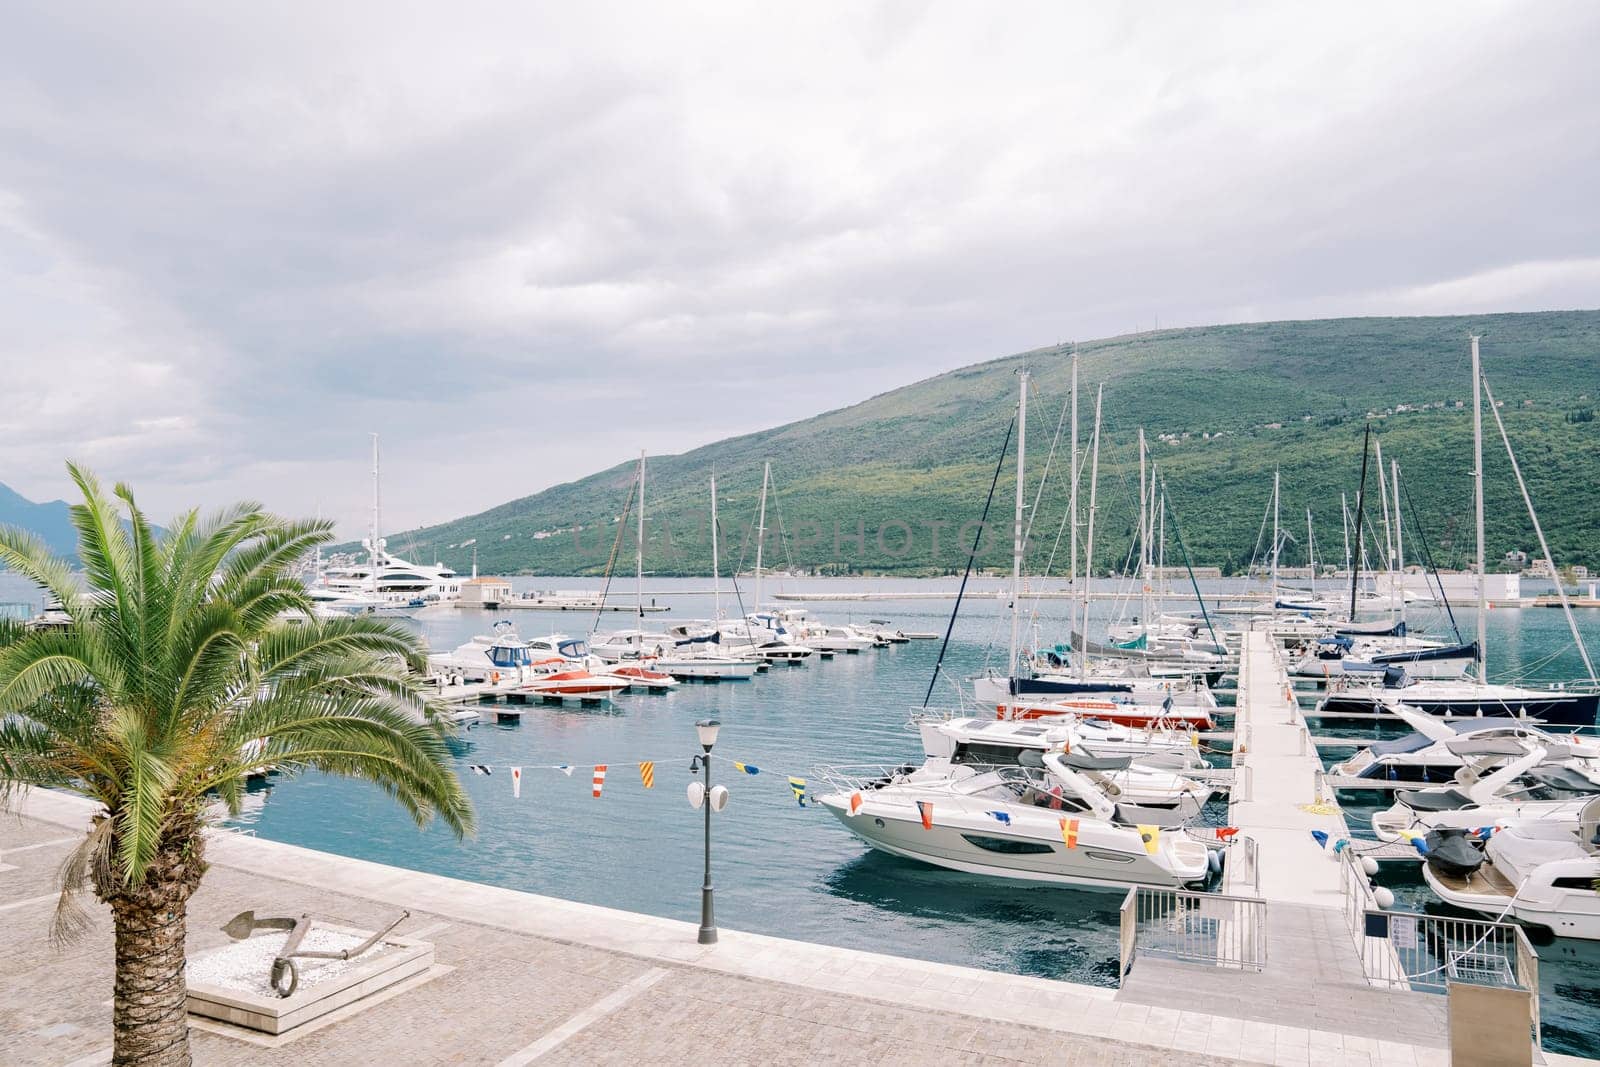 Yachts stand in rows along the piers of a luxurious marina against the backdrop of green mountains. High quality photo